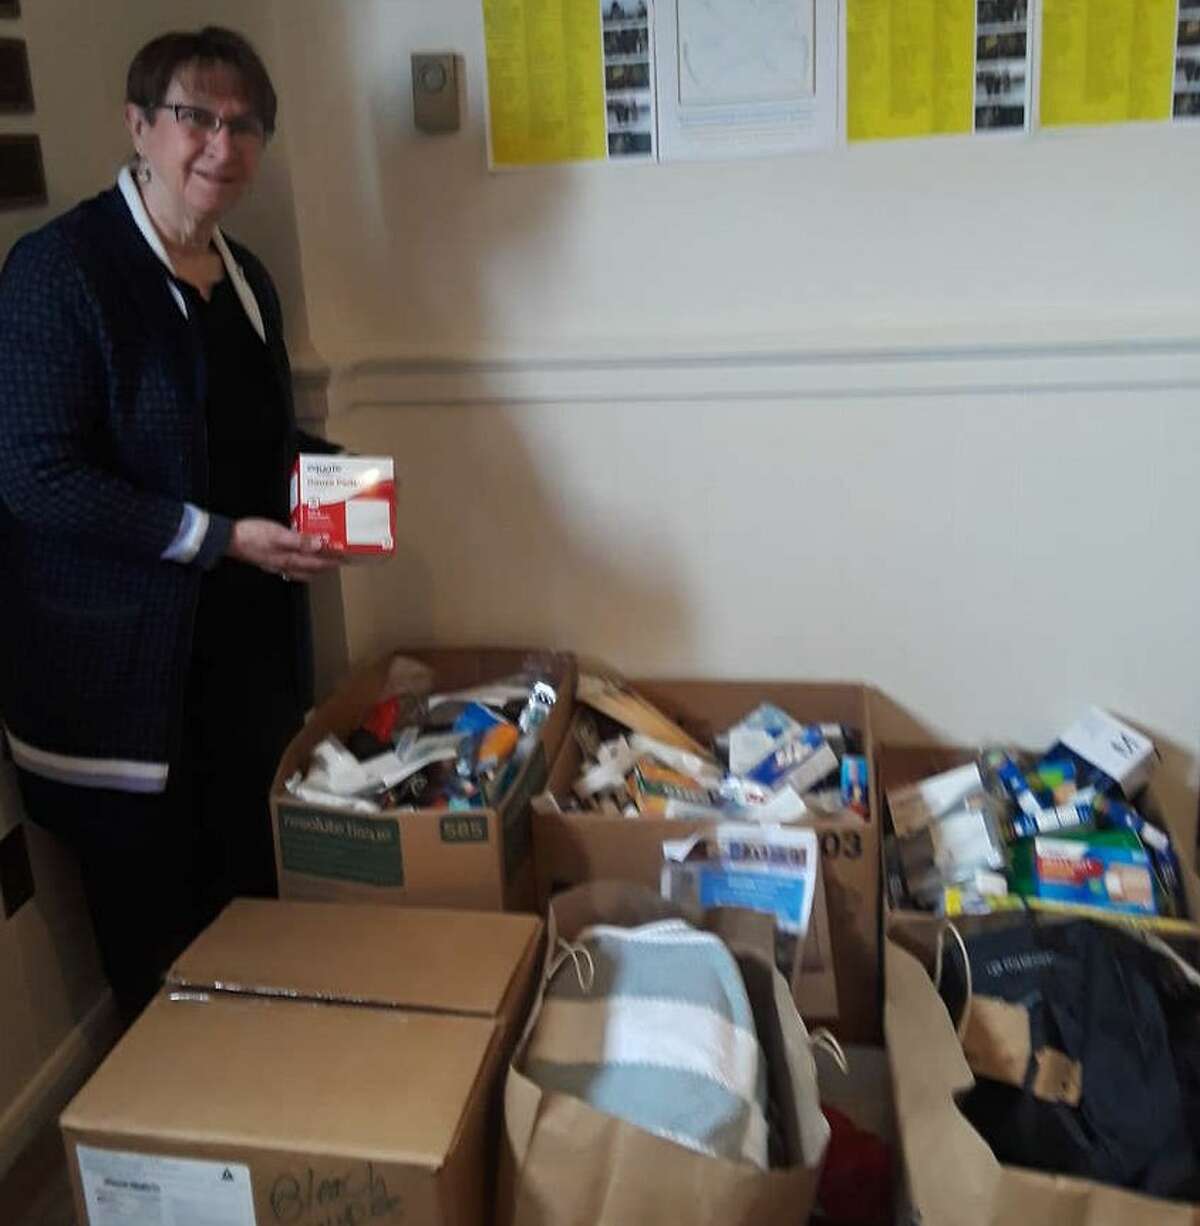 Clare Carroll, All Saints parishioner, organizes medical supplies collected for Ukrainian relief. The Albany church is hosting a Sunday service of music, prayer, Ukrainian poems shared in English and donation collection on Sunday, March 27.